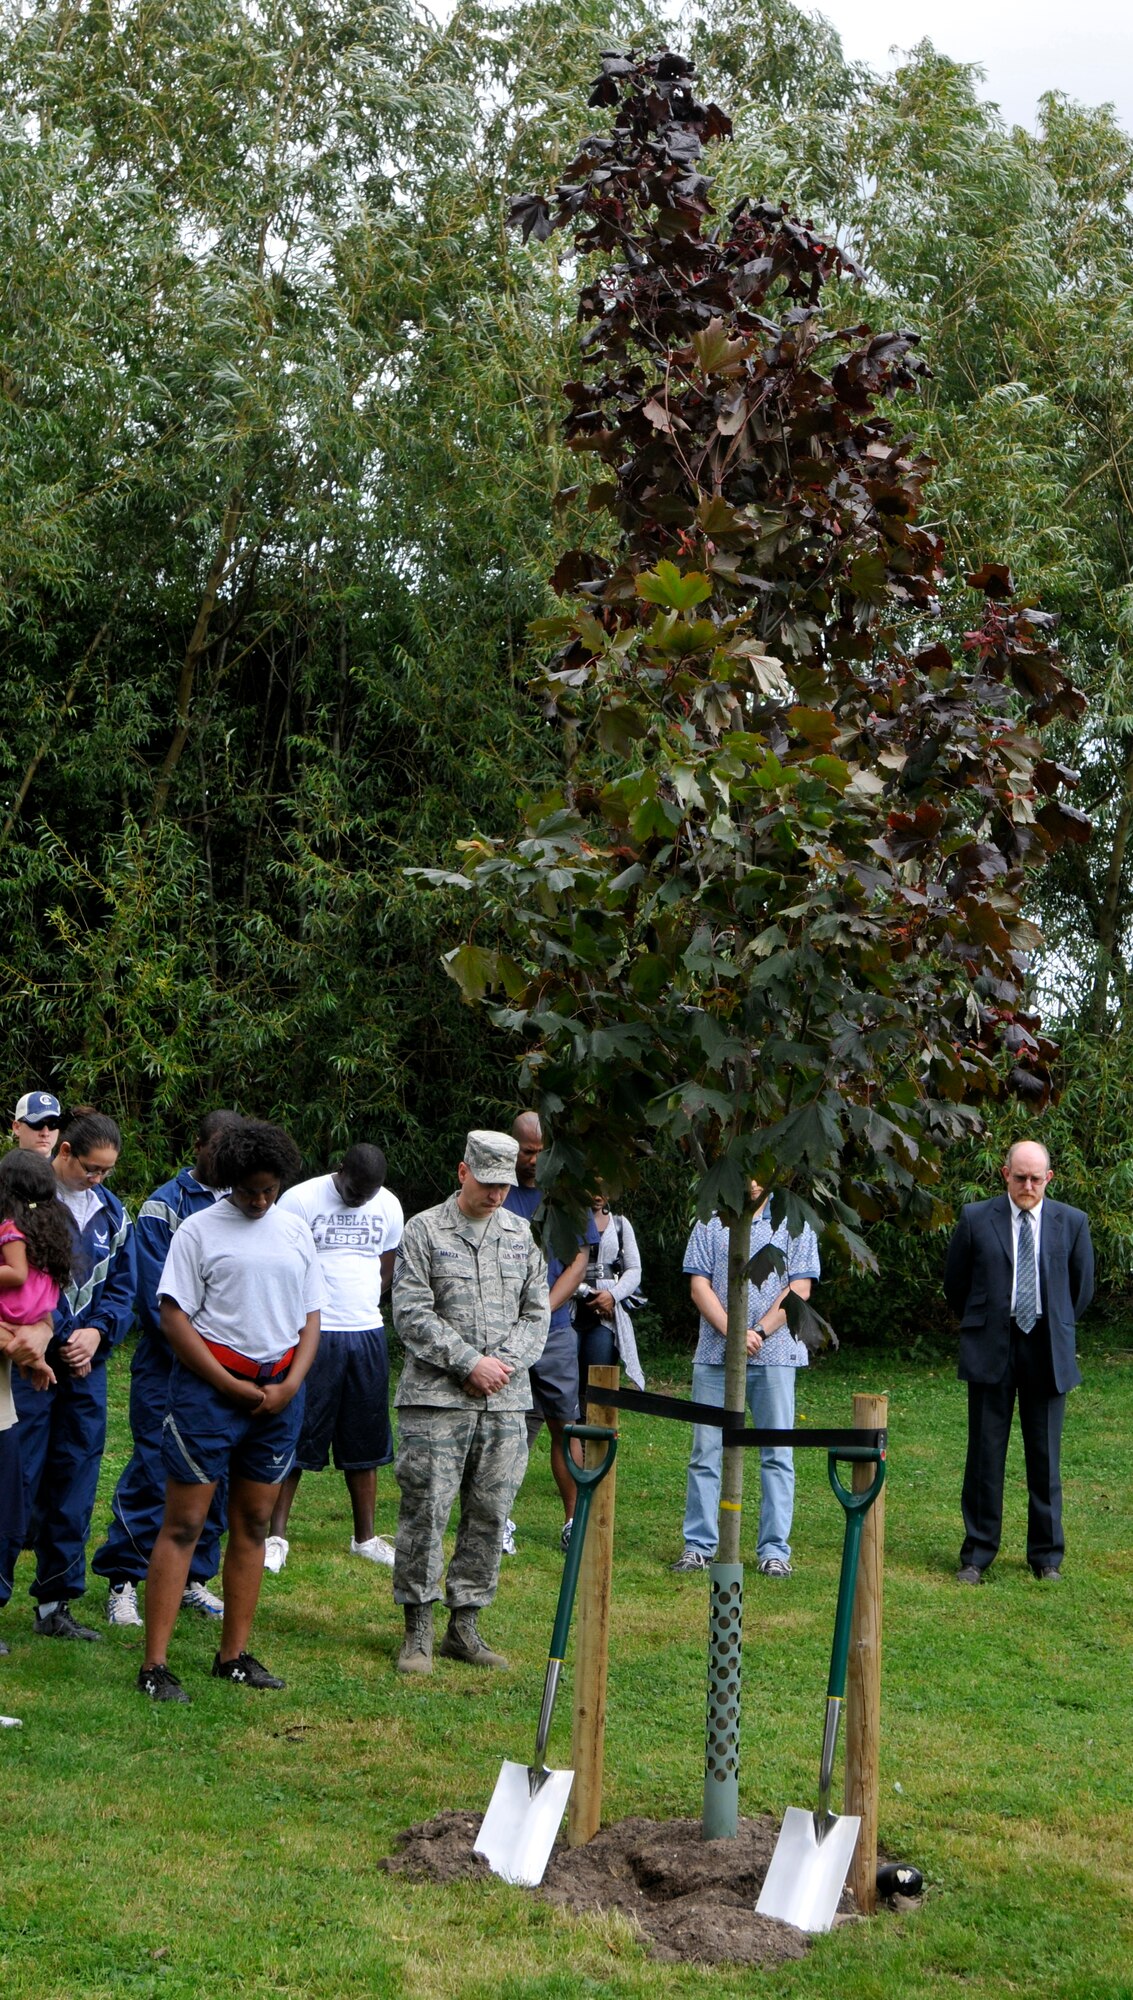 ROYAL AIR FORCE LAKENHEATH, England - Airmen and families bow heads for a moment of silence during a tree dedication ceremony to honor victims of 9/11 at Peacekeeper Park, Sept. 11, 2011. The tree dedication followed a 24-hour run that ended at 1:46 p.m. on Sept. 11, 2011, the time the first tower was hit. (U.S. Air Force photo by Senior Airman Tiffany M. Deuel)